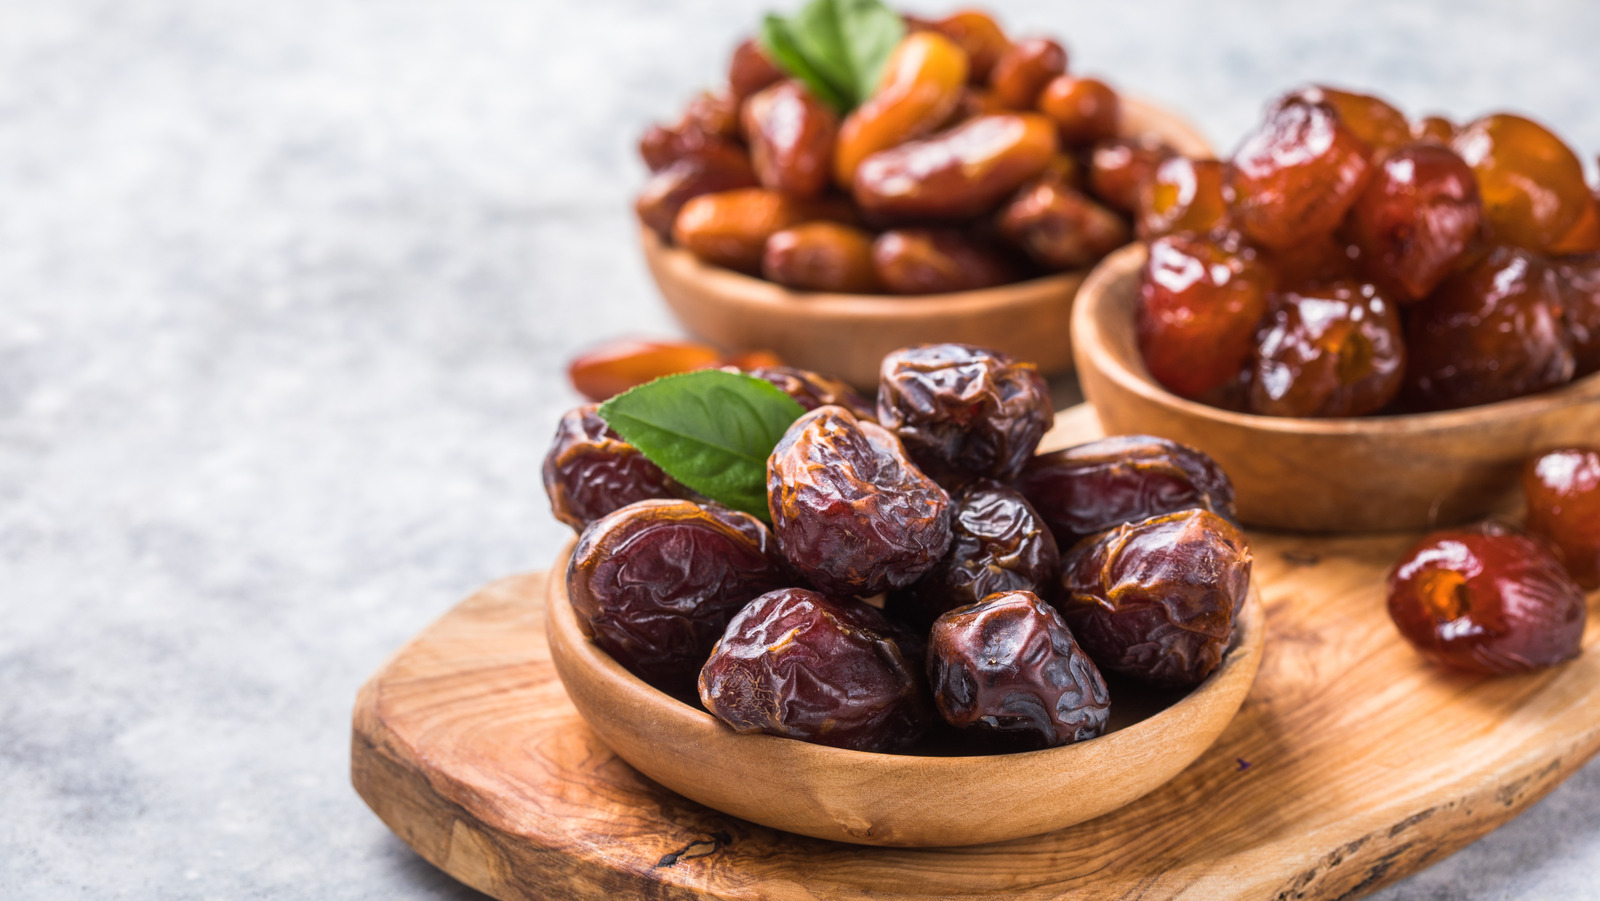 What Are Dates And How Do You Eat Them?